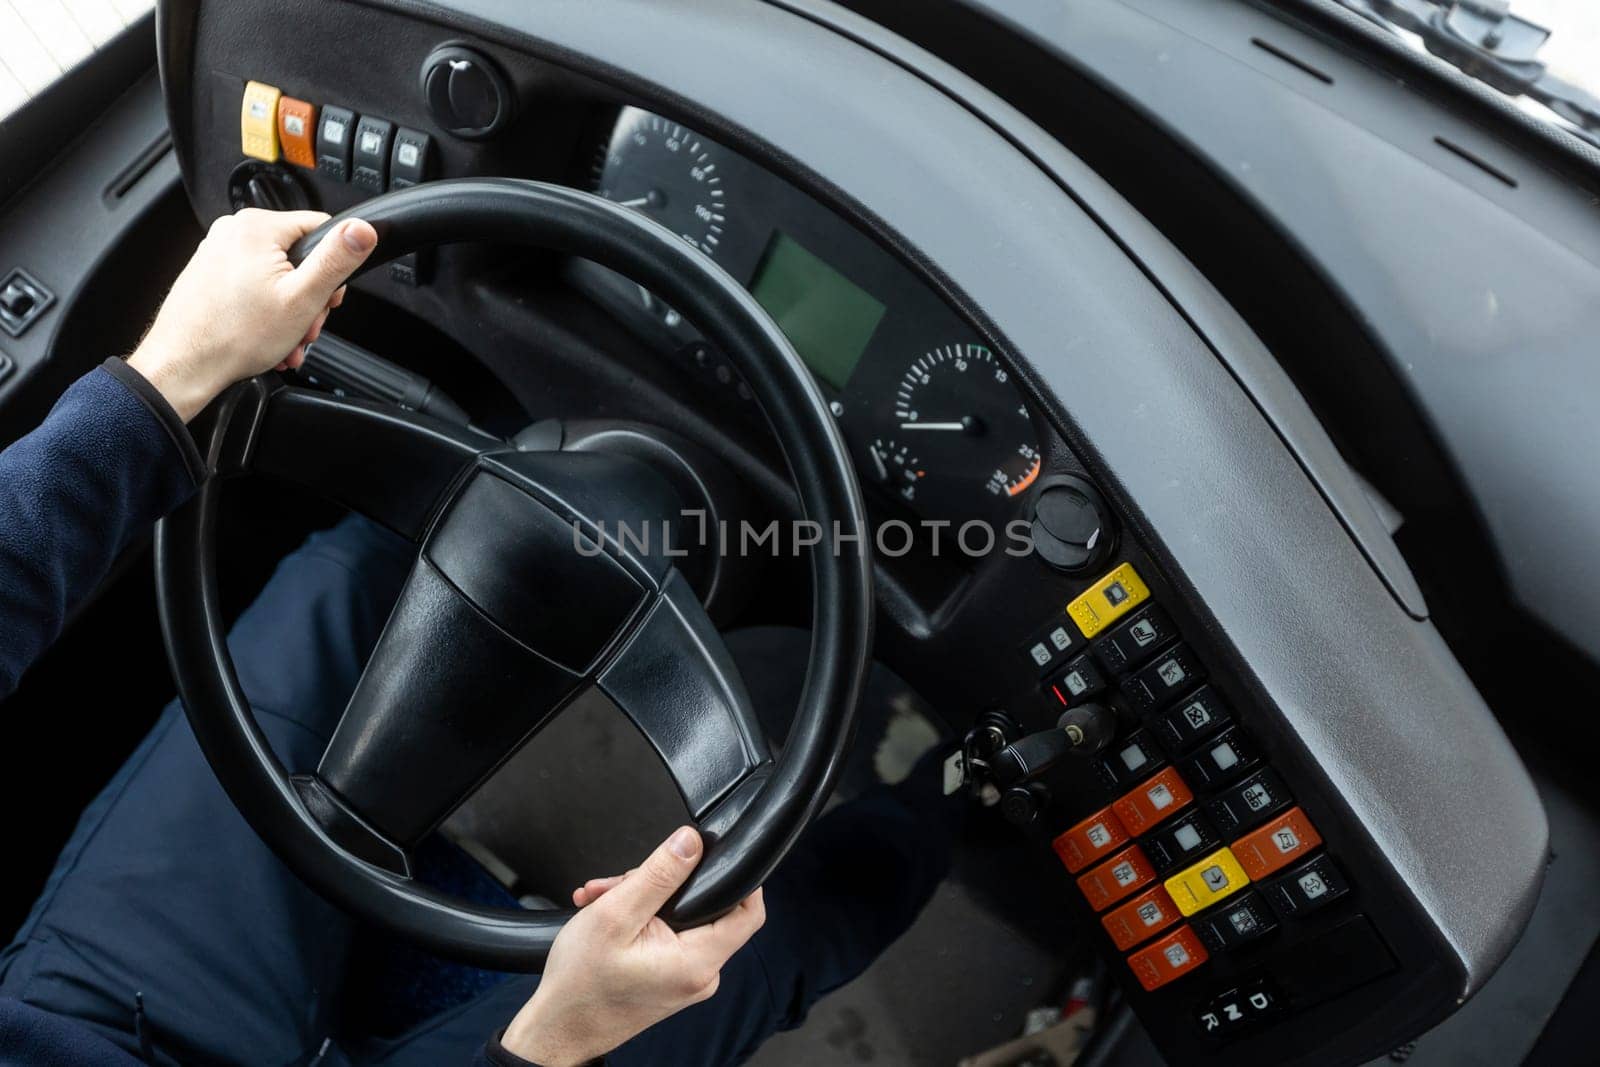 Cockpit or cabin of public transport, bus driver holding steering wheel, concept of an urban public transportation